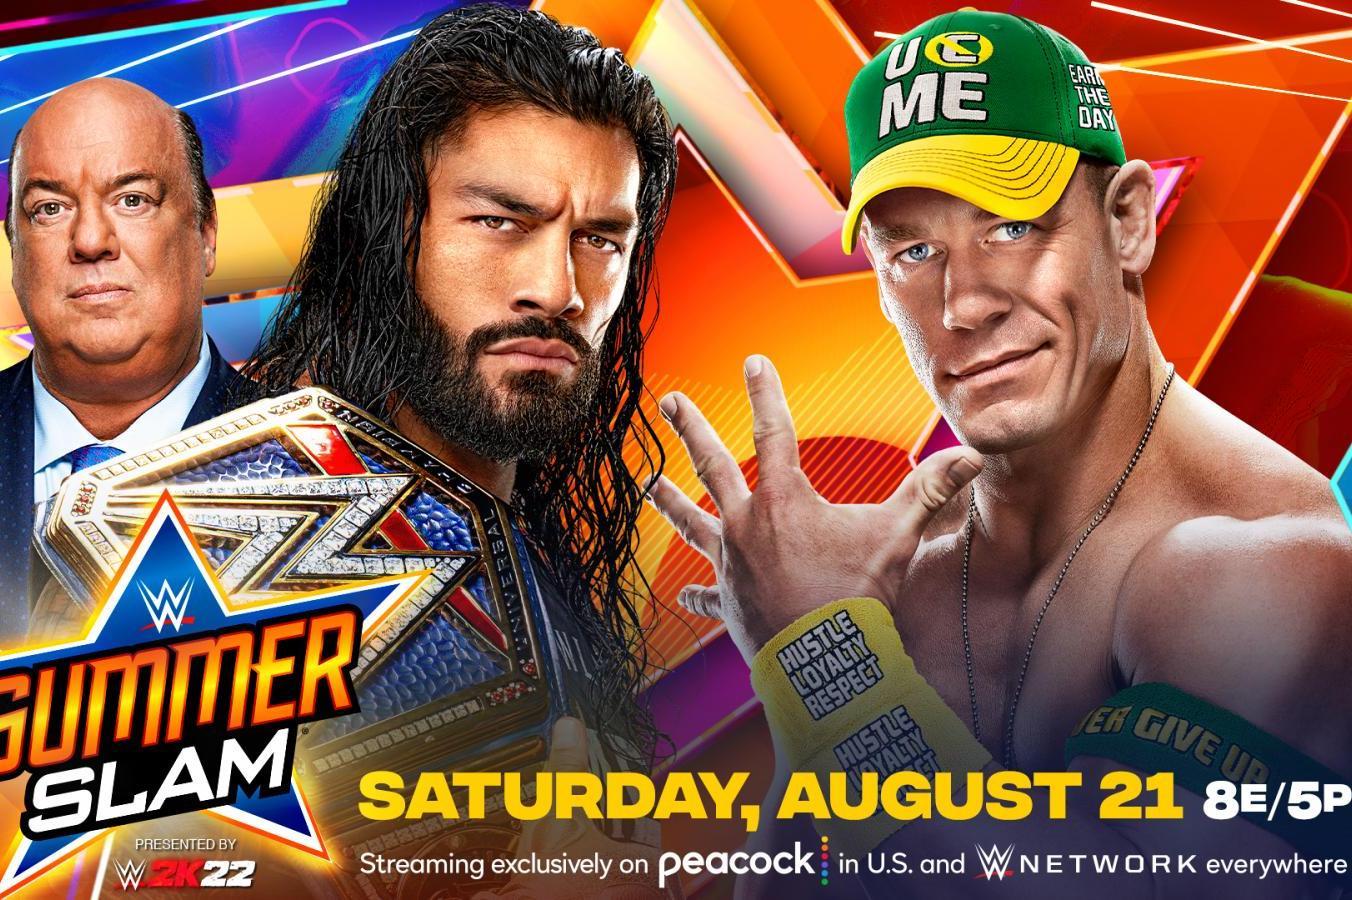 John Cena vs. Roman Reigns and Matches with the Most Star Power in ...